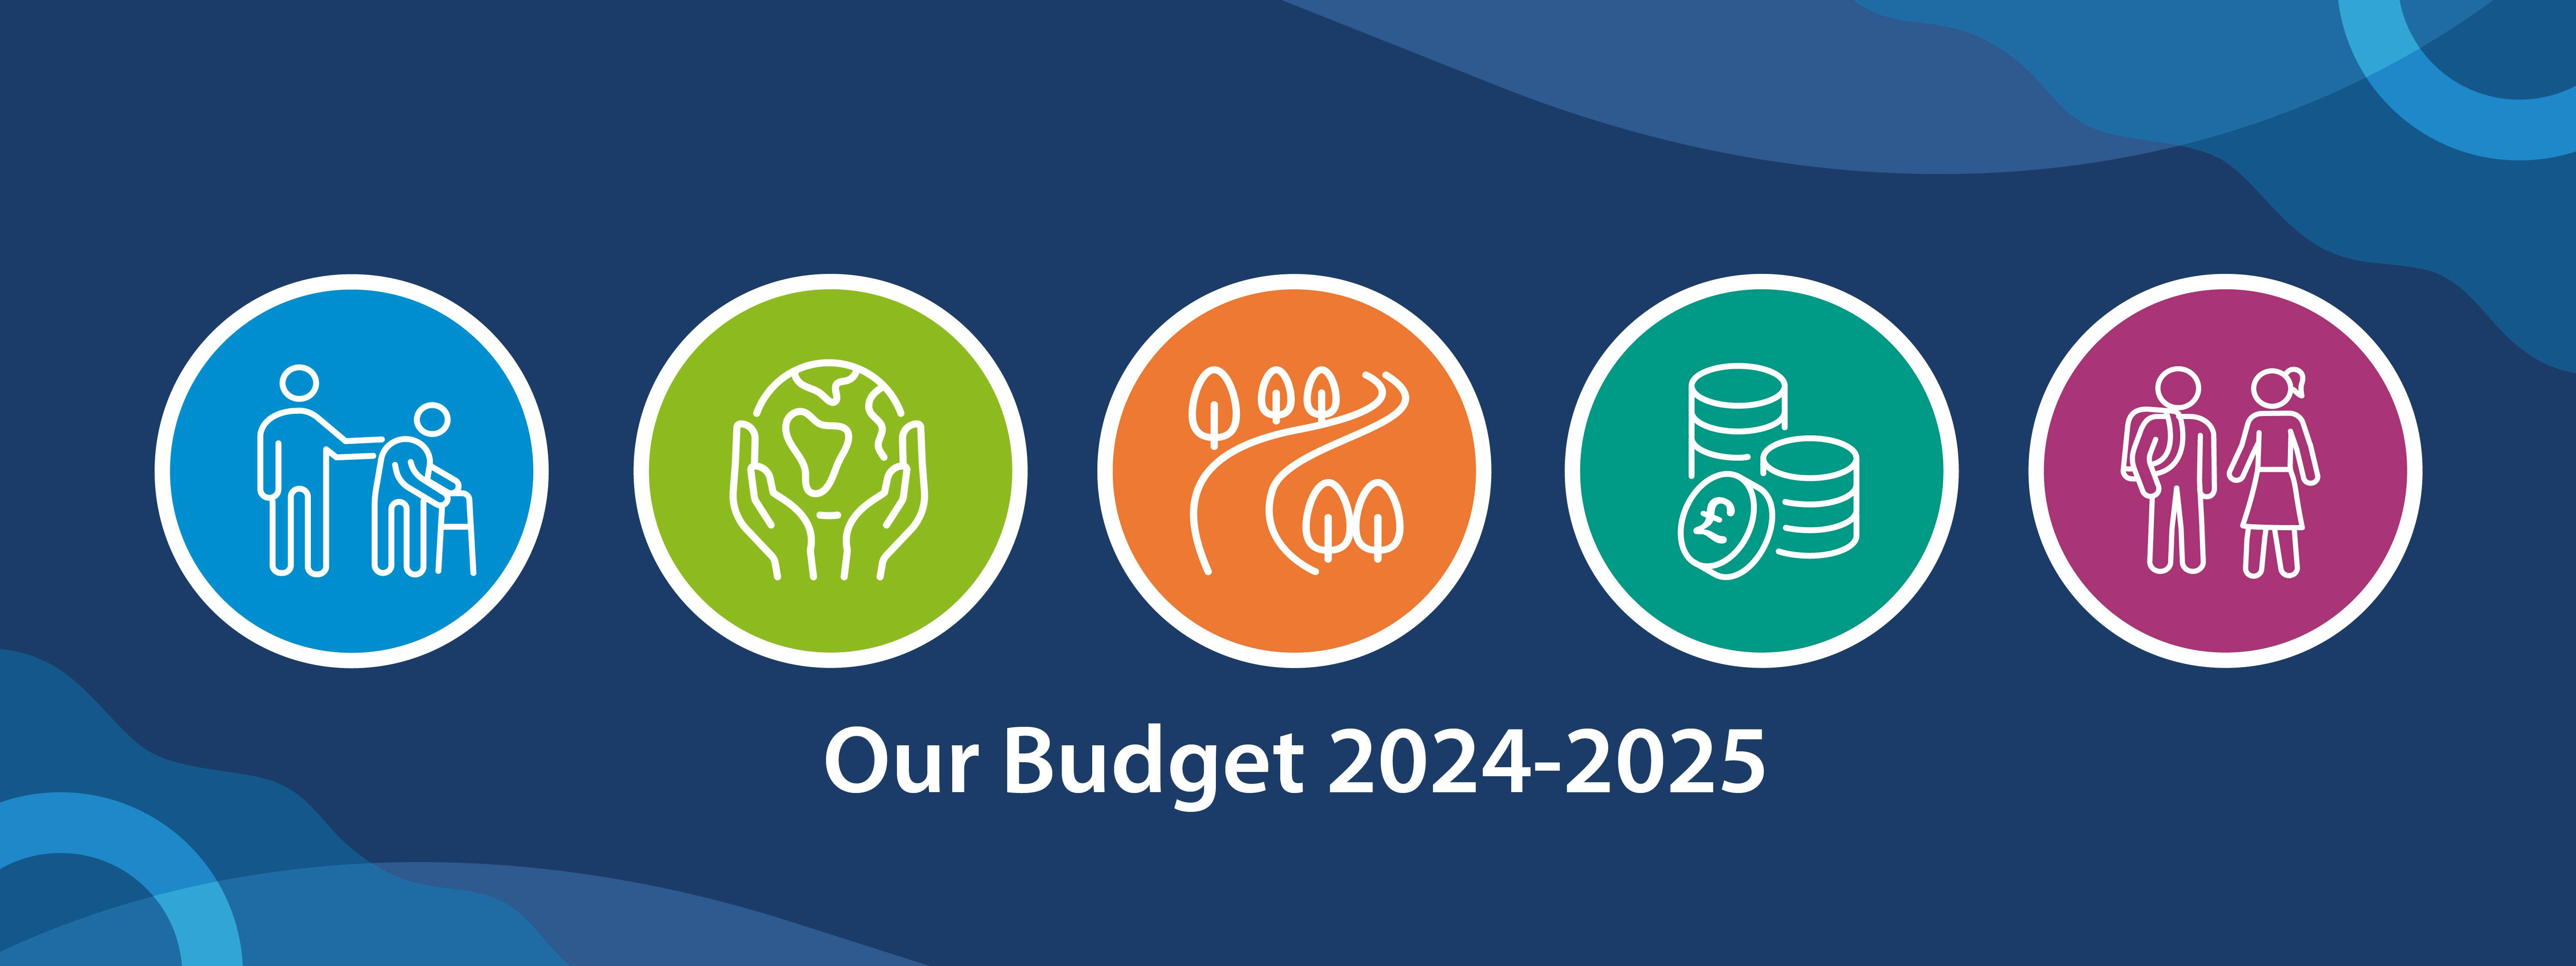 Our Budget 2024-24, image of older people, a world in hands, a road lined with trees, a pile of coins, and children walking